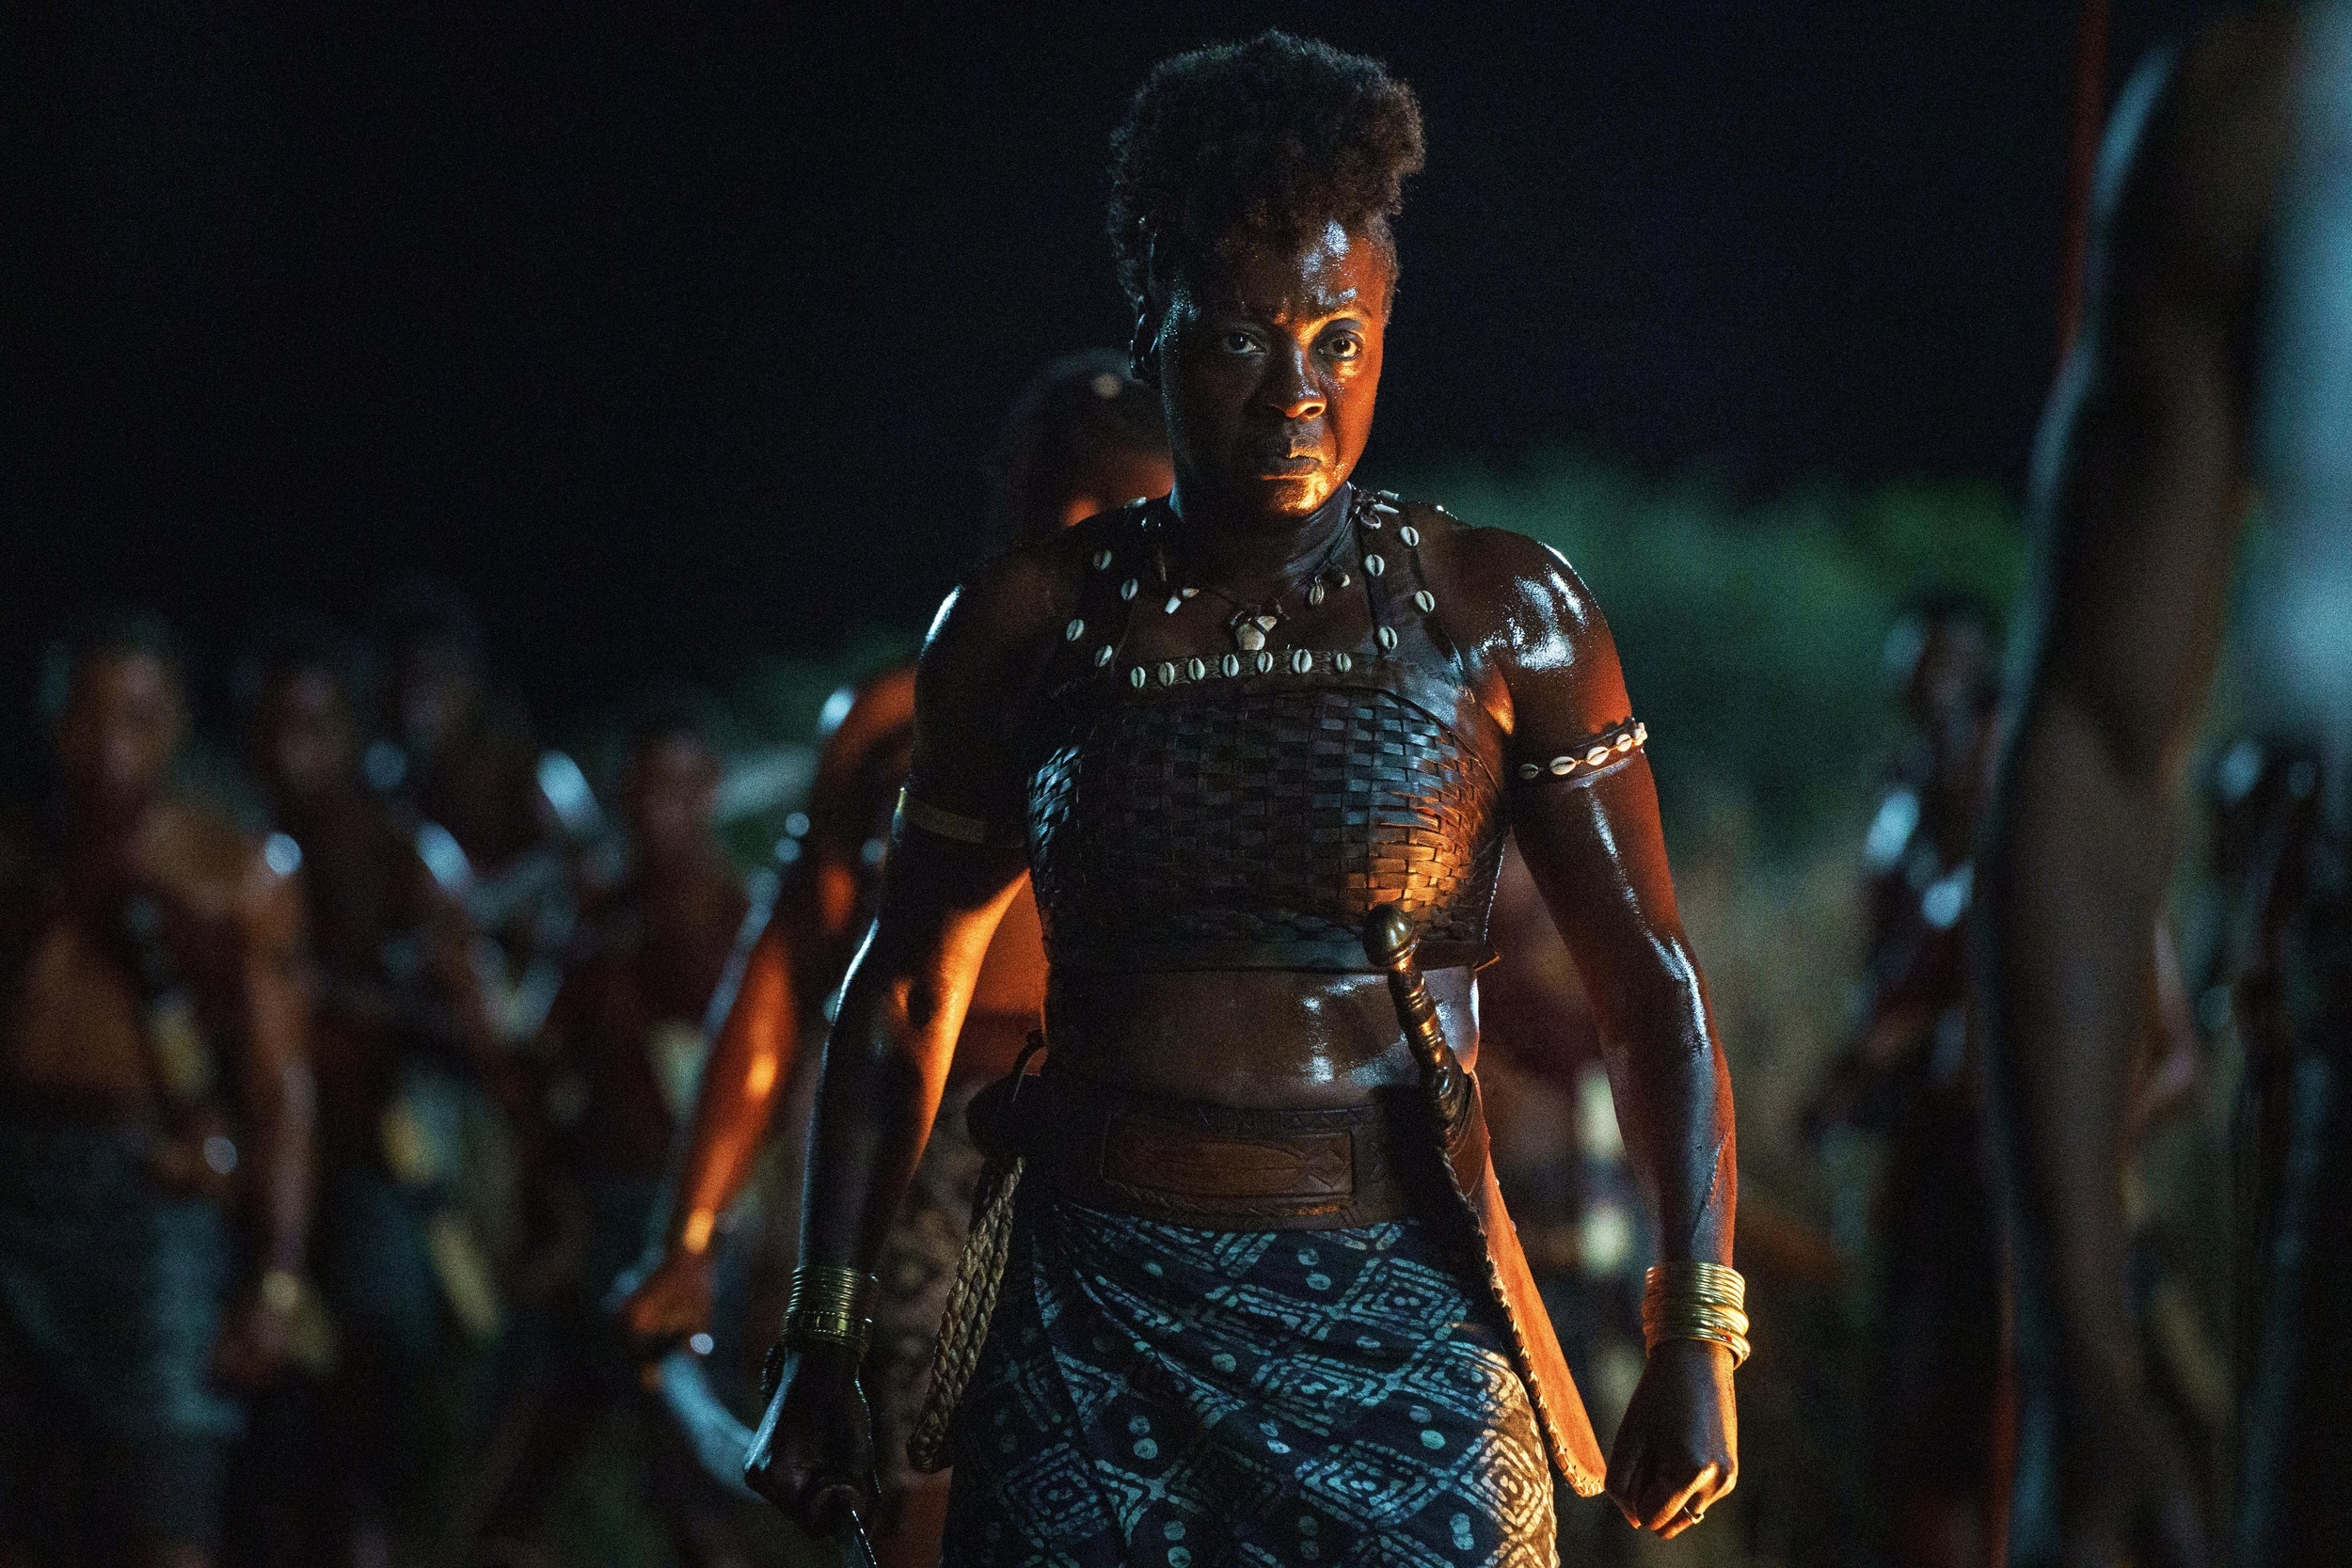 <p>The Viola Davis film <em>The Woman King</em> is based on the lives of the Agojie, an all-female African army that existed from the 17th to the 19th century. The story is set in the 1820s, and it’s got just as much action as any fictional war story. </p><p><a href='https://www.msn.com/en-us/community/channel/vid-cj9pqbr0vn9in2b6ddcd8sfgpfq6x6utp44fssrv6mc2gtybw0us'>Follow us on MSN to see more of our exclusive entertainment content.</a></p>